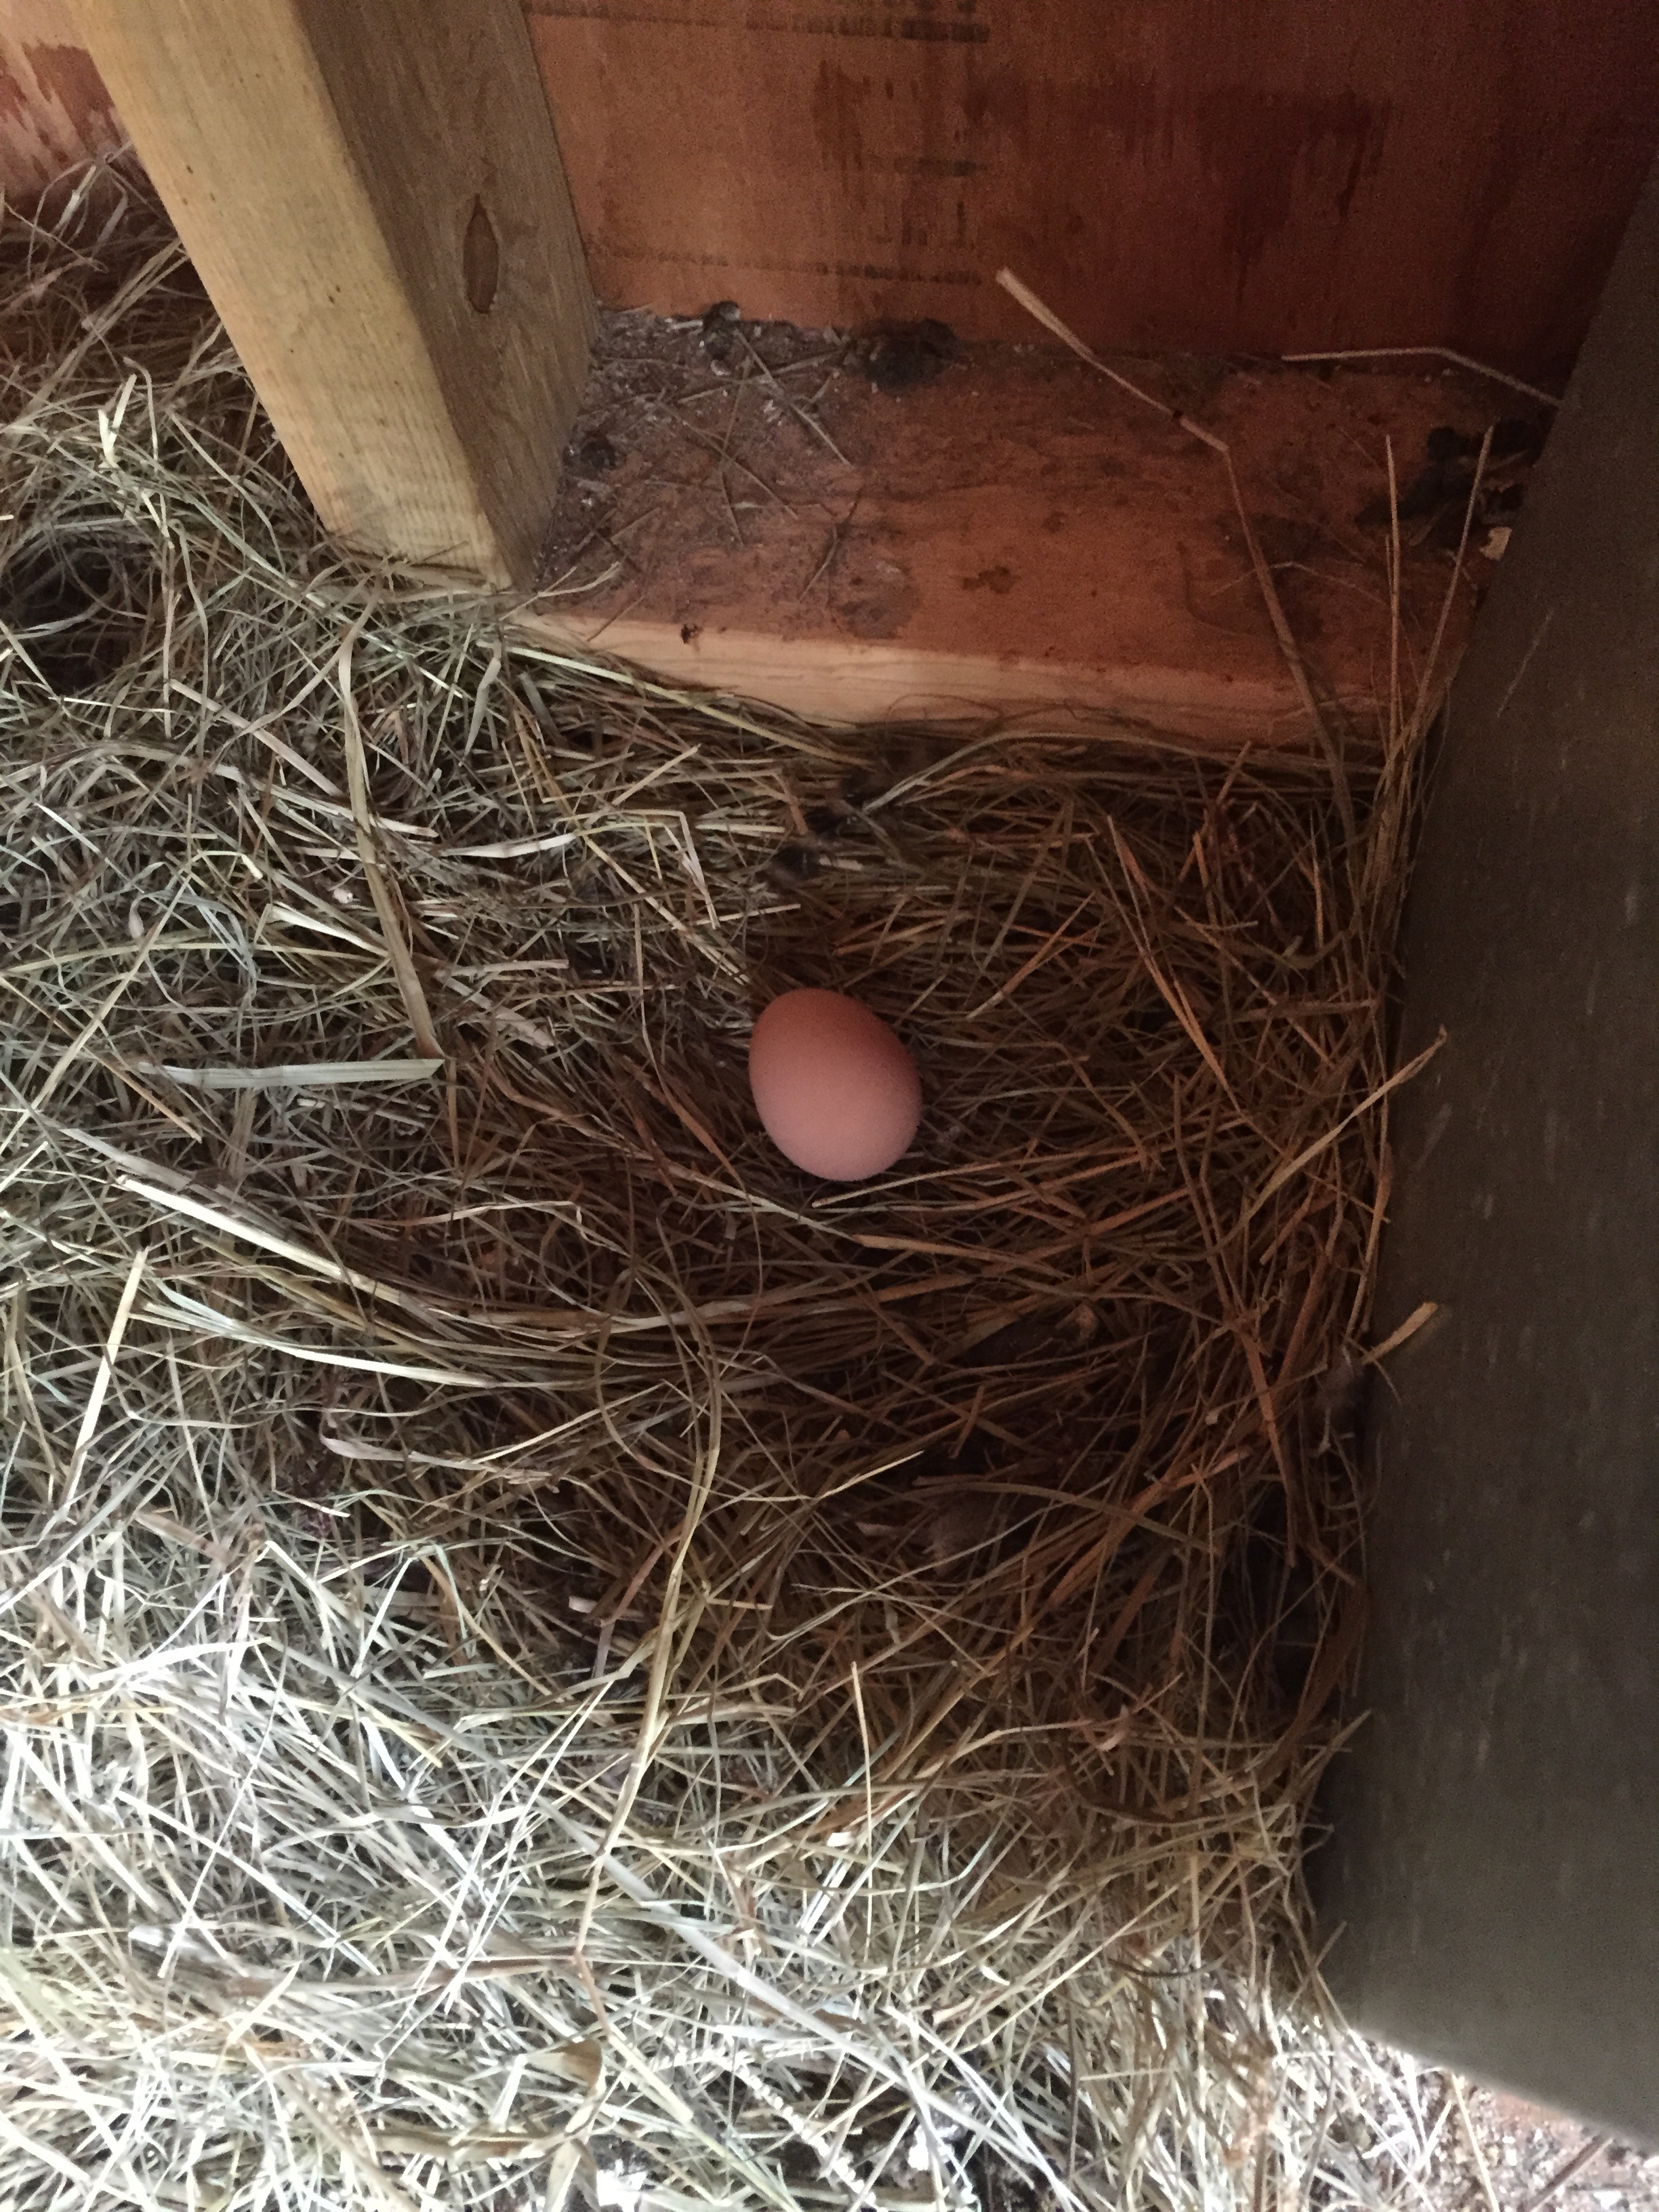 It took us a little bit to get the hens to lay in the nesting boxes. In this picture the egg is laying on the floor.